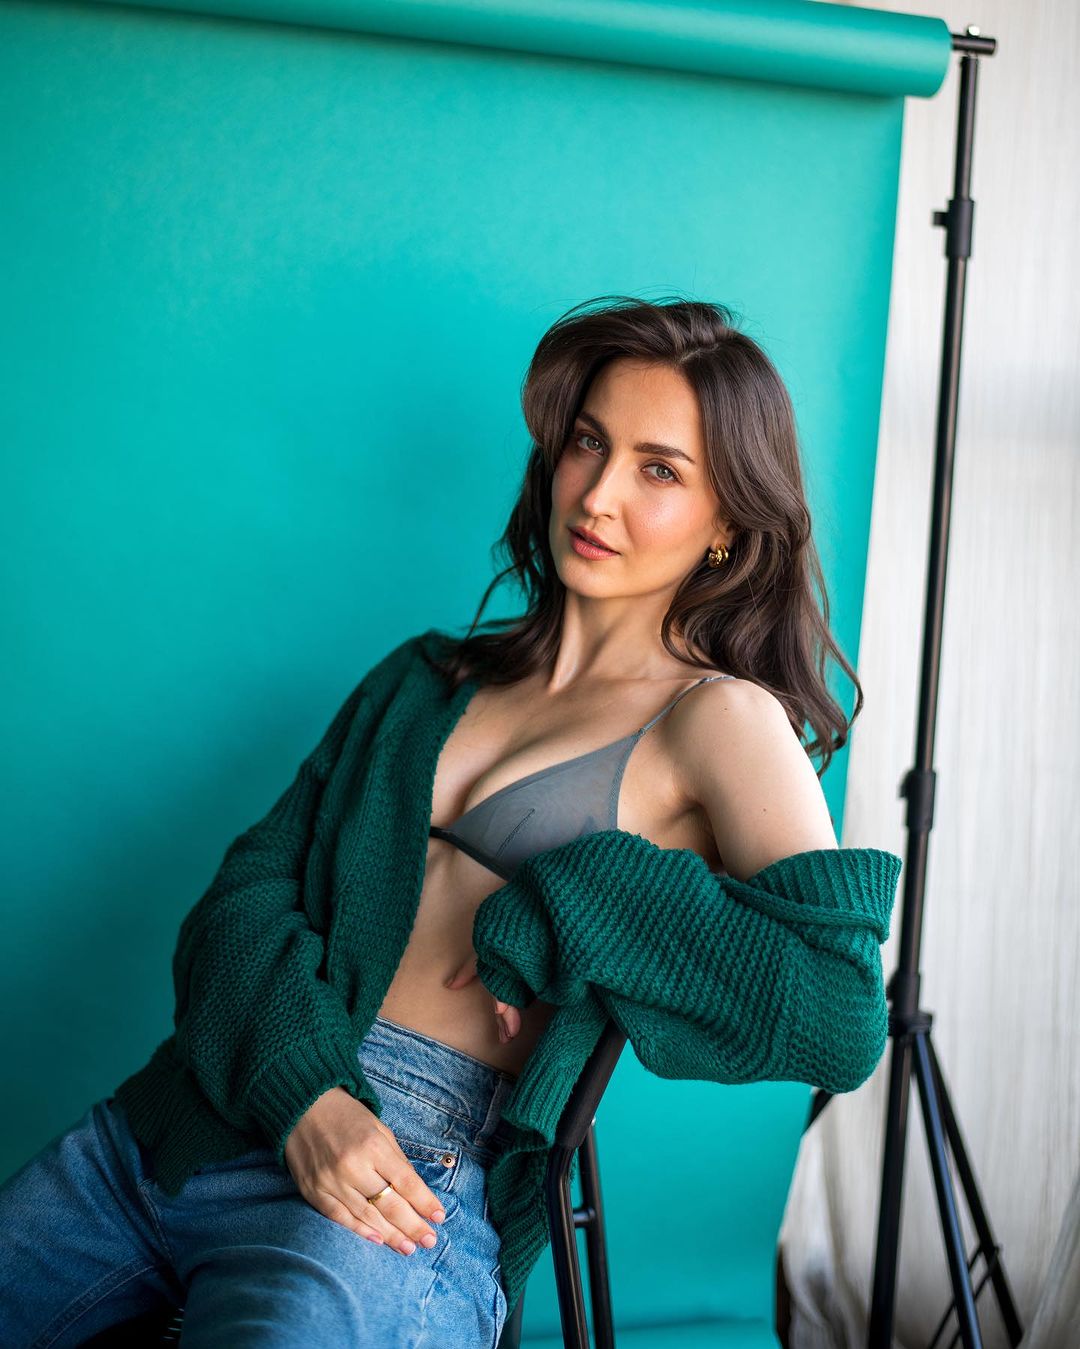 HINDI ACTRESS ELLI AVRRAM IMAGES IN GREEN TOP BLUE JEANS 5